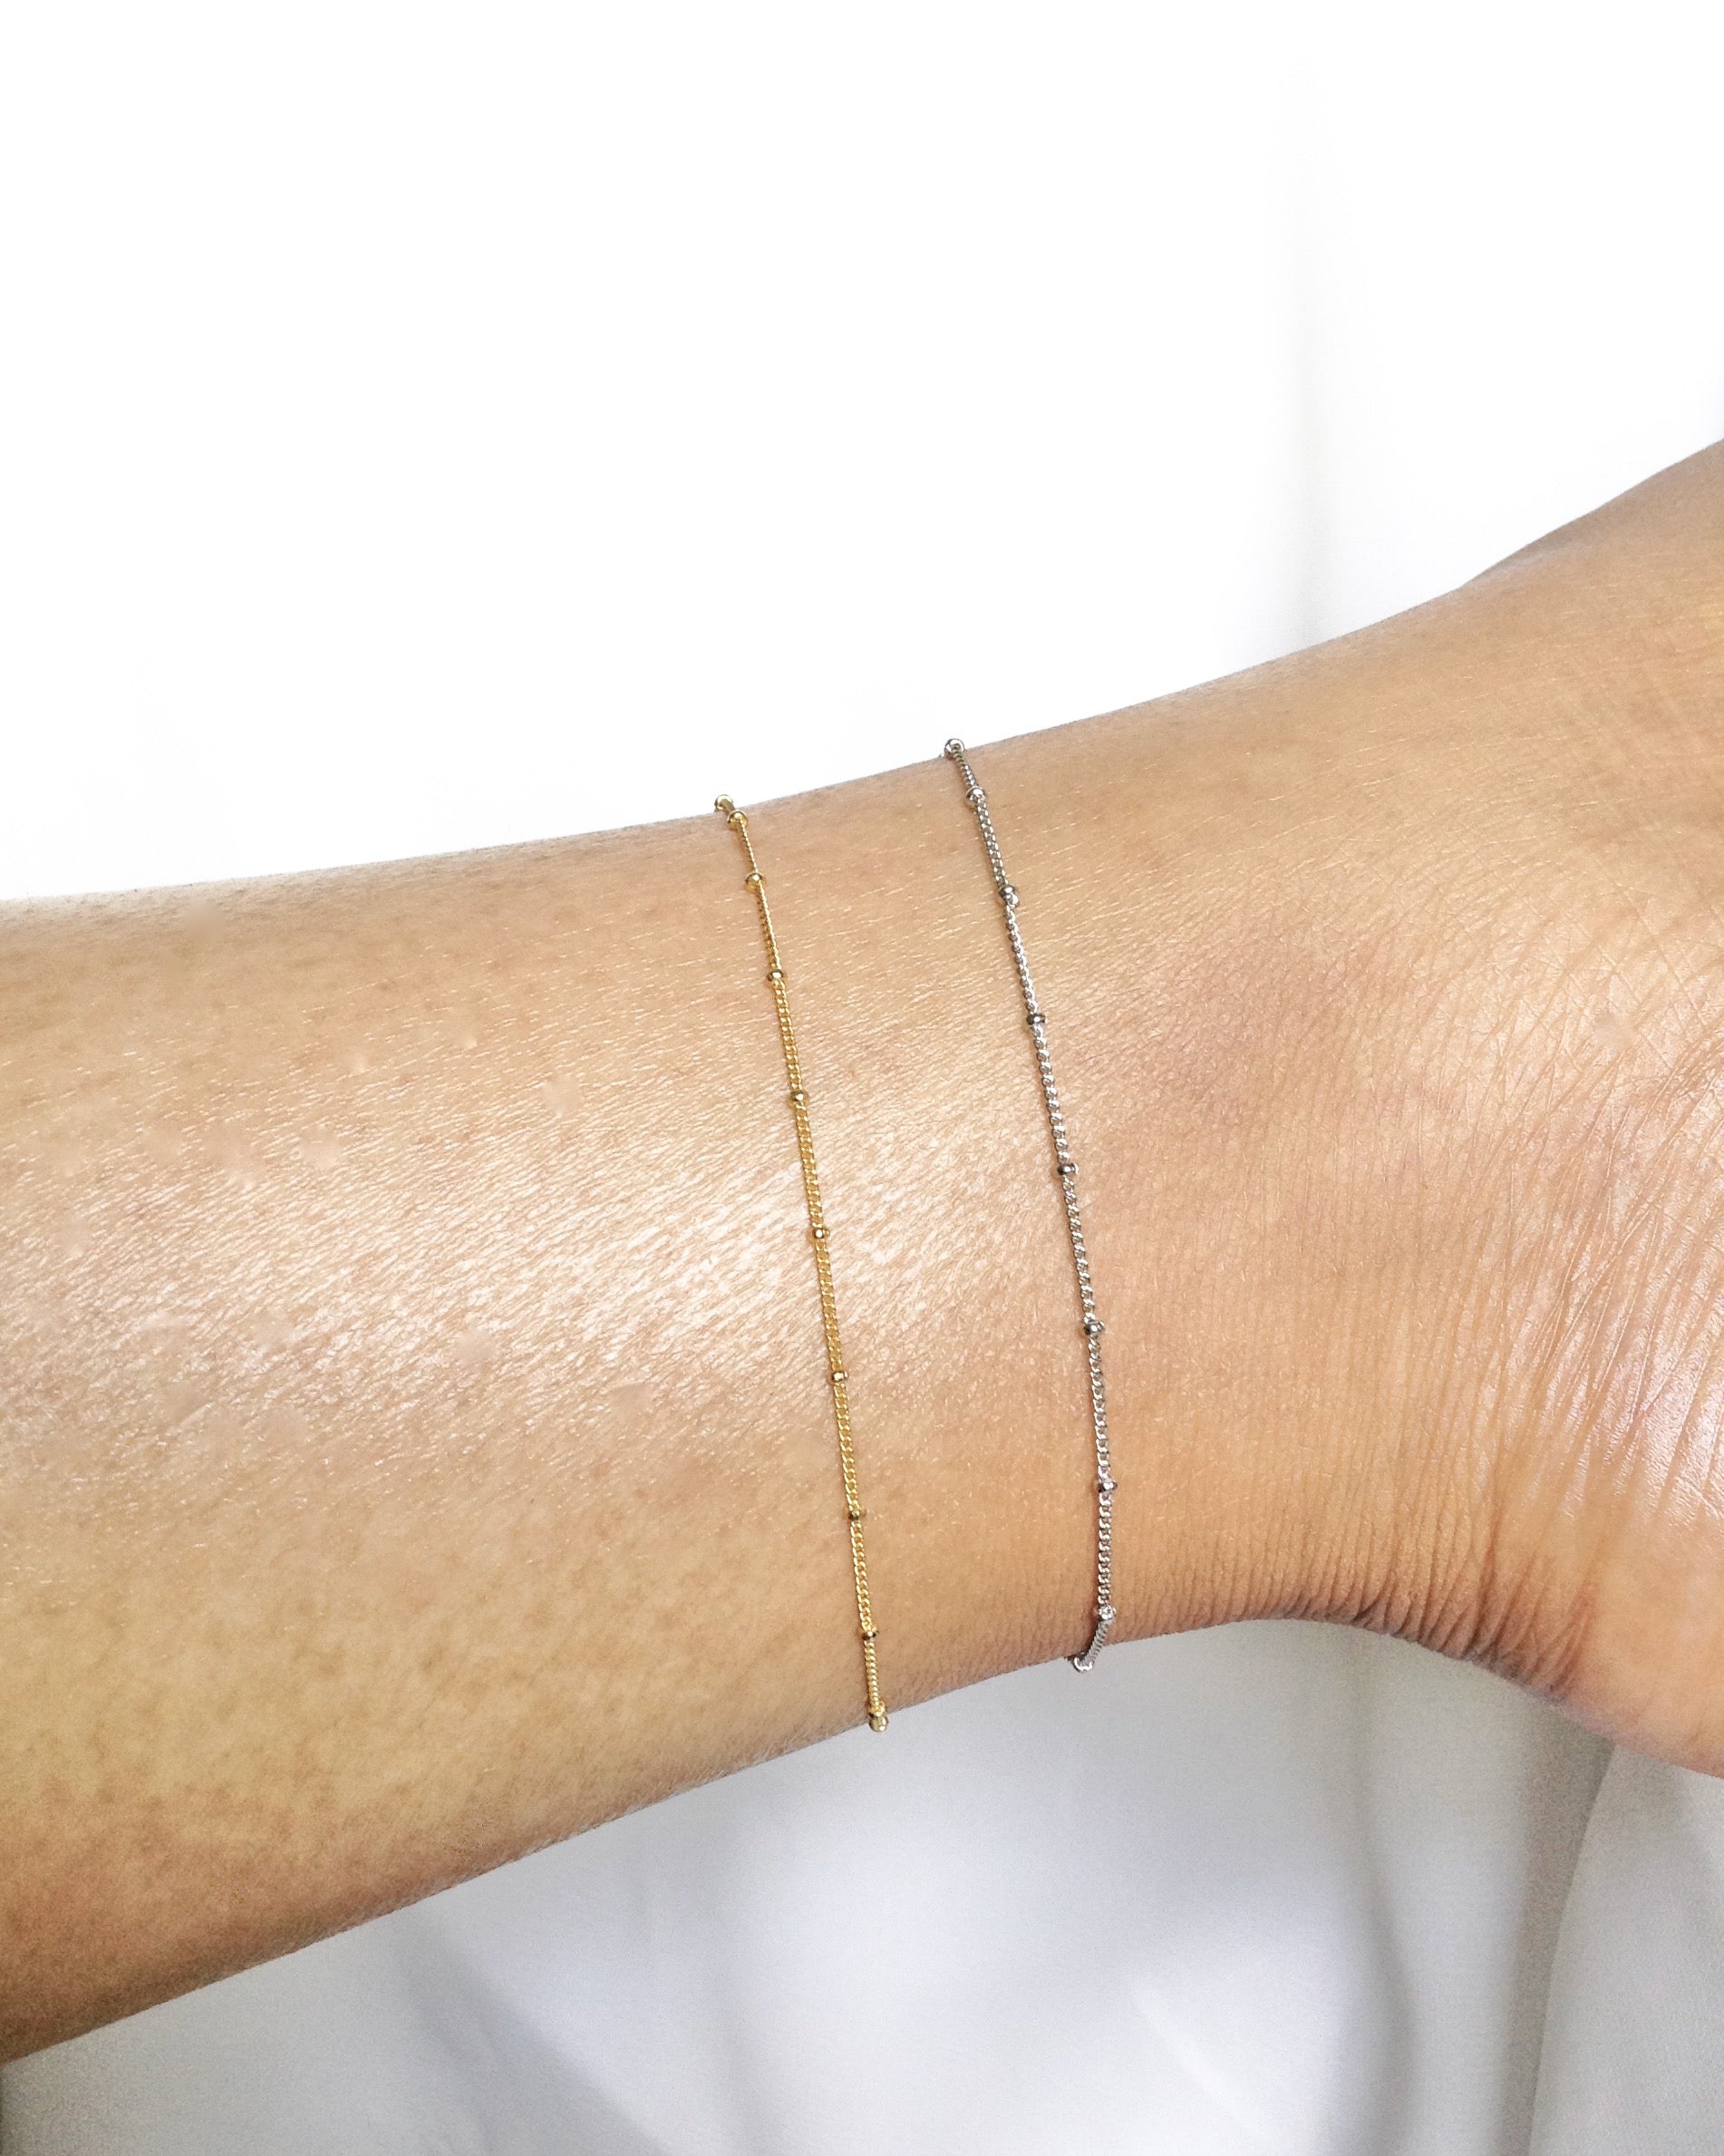 Dainty Anklet in Gold Filled or Sterling Silver | Minimalist Ankle Bracelet | Simple Minimal Delicate Anklet | IB Jewelry